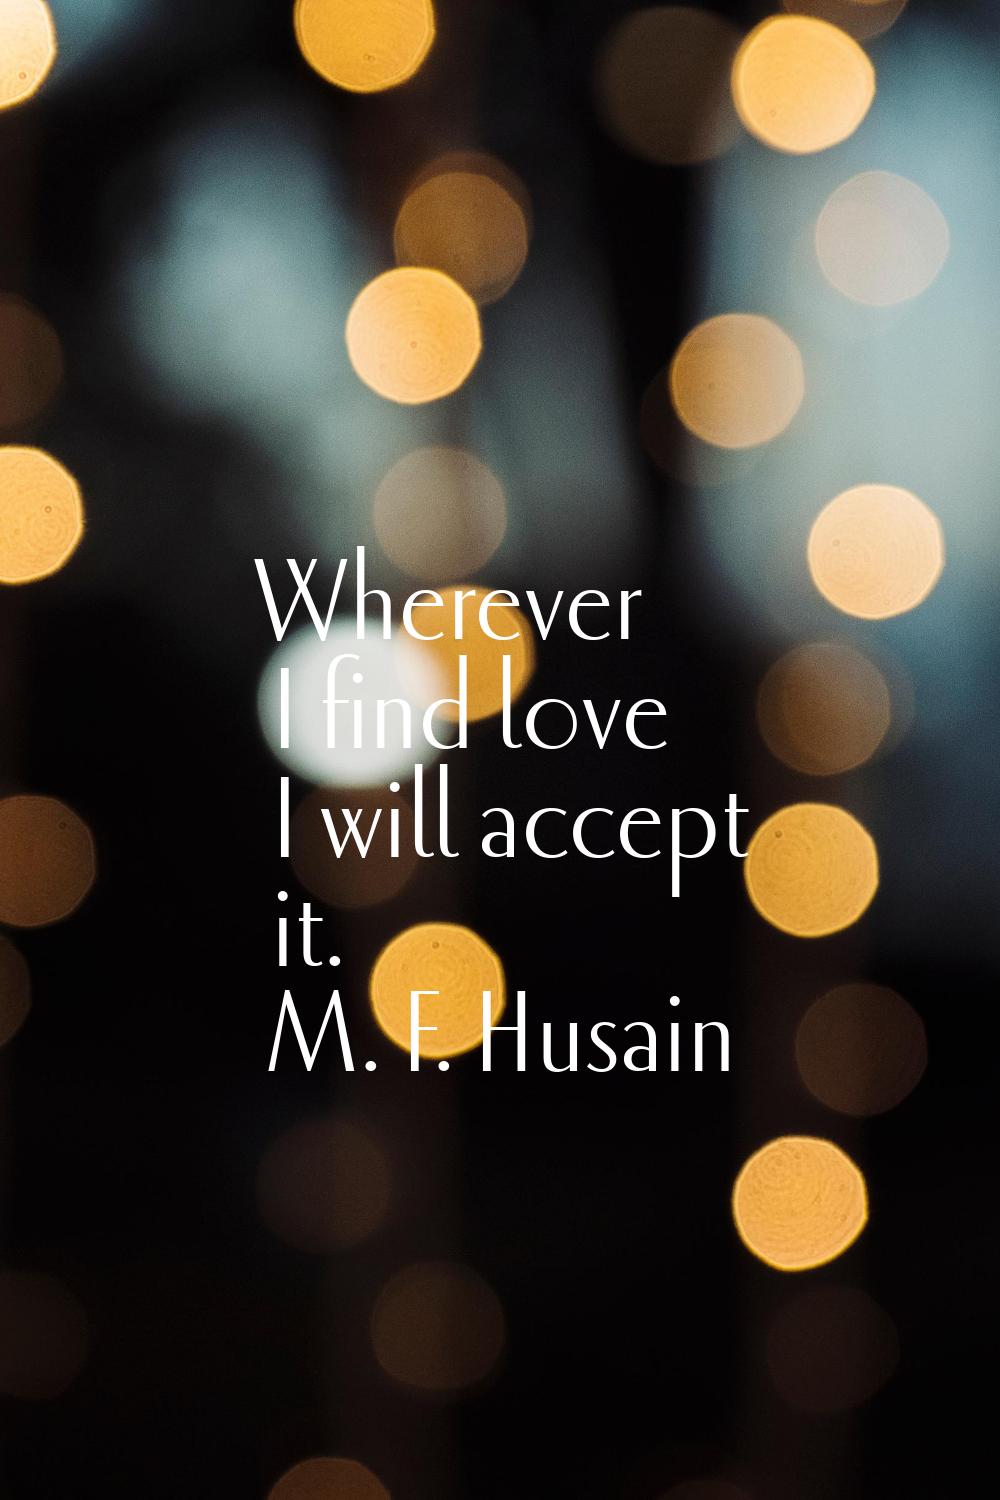 Wherever I find love I will accept it.